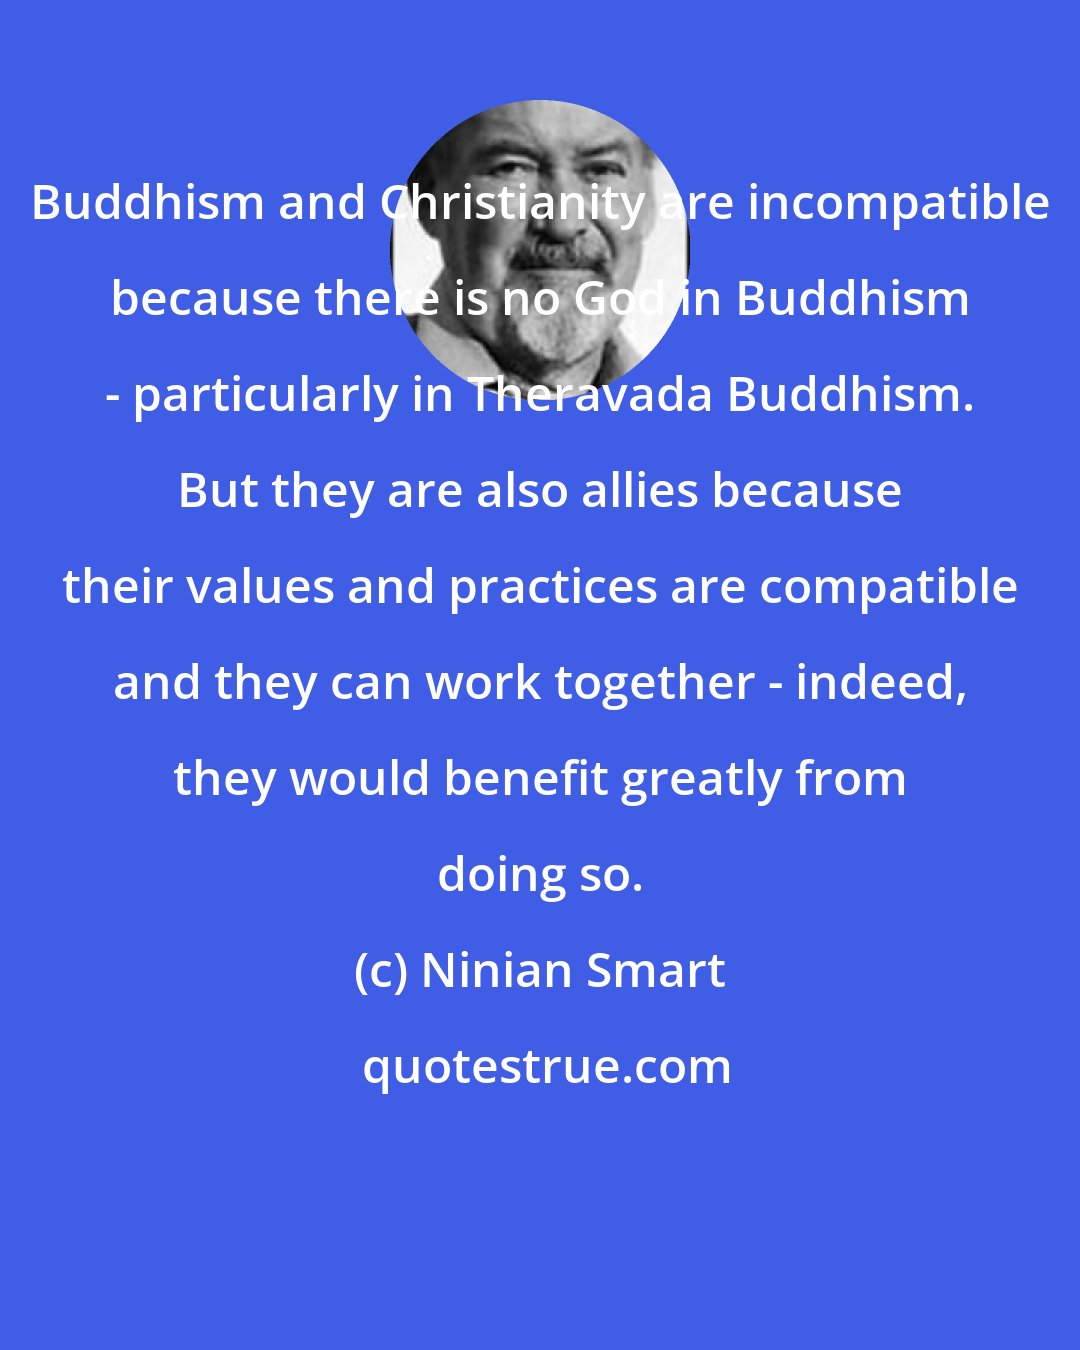 Ninian Smart: Buddhism and Christianity are incompatible because there is no God in Buddhism - particularly in Theravada Buddhism. But they are also allies because their values and practices are compatible and they can work together - indeed, they would benefit greatly from doing so.